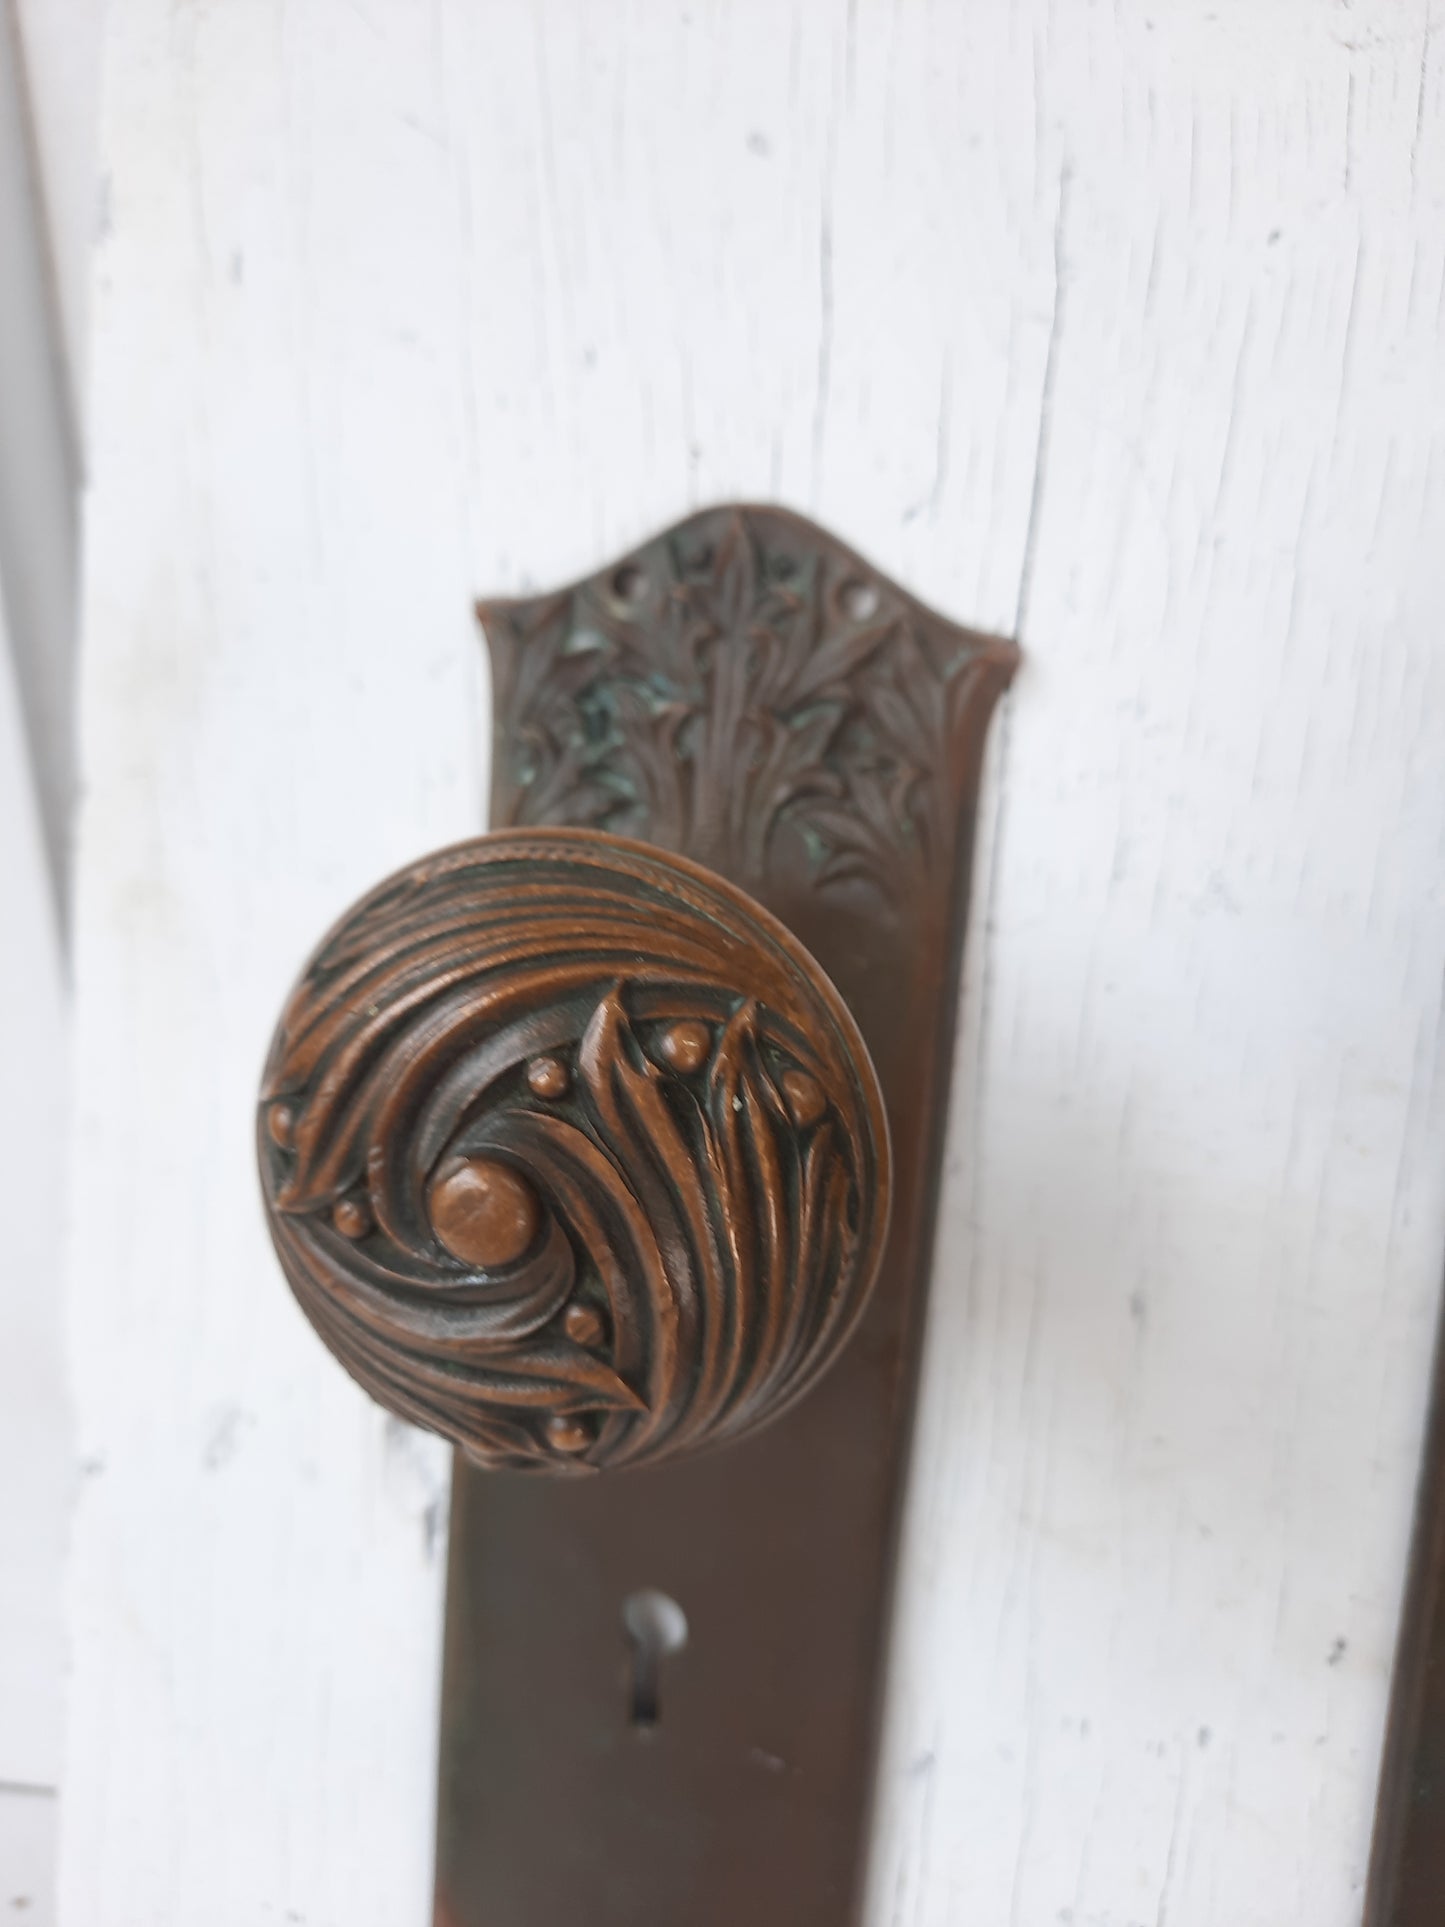 Cluny Pattern by Yale and Towne Antique Door Hardware, Antique Bronze Doorknobs and Backplates, Victorian Era 030507